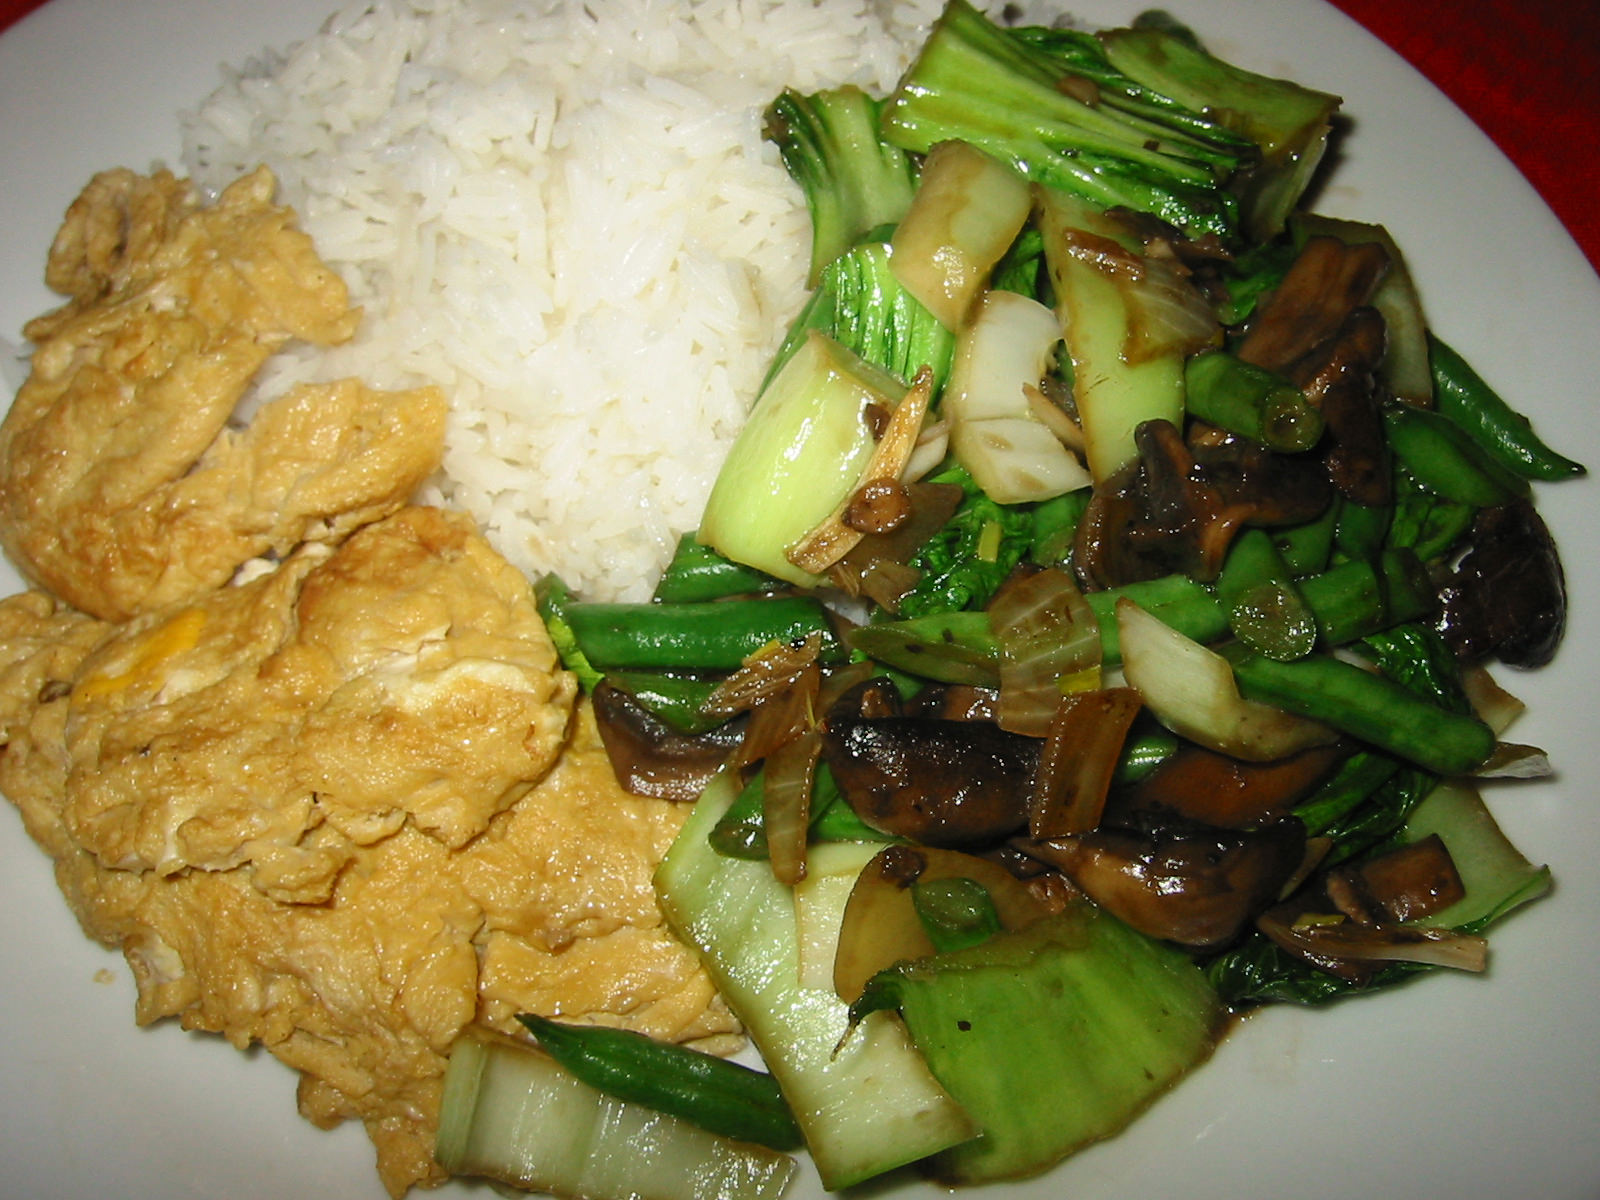 Chinese omelette, vegie stir-fry and rice